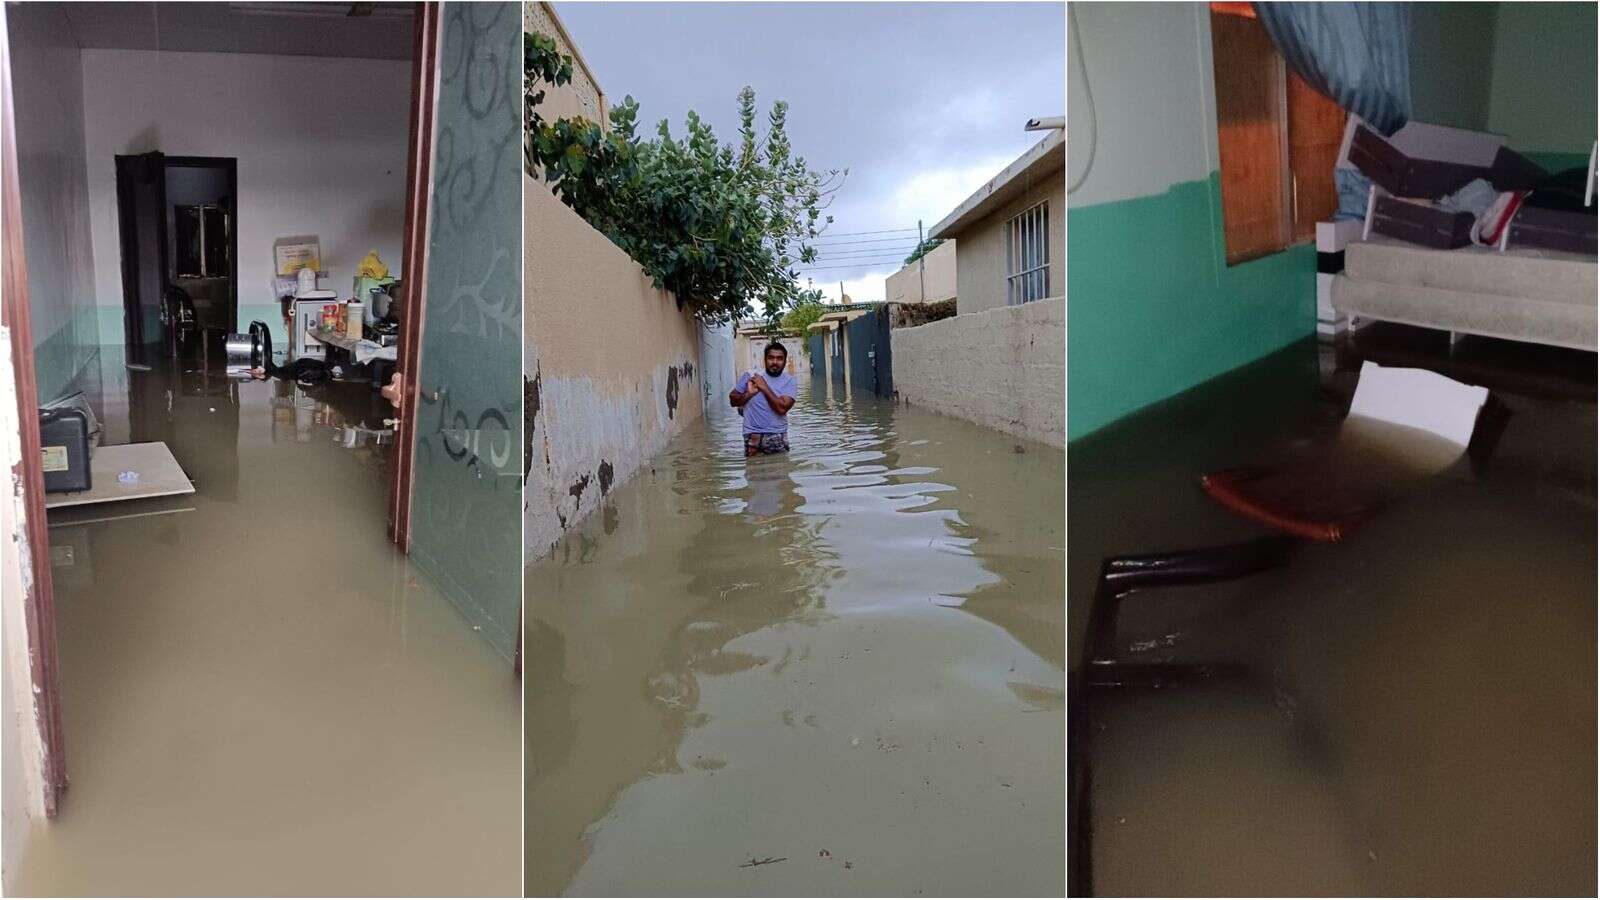 uae: 4 days after evacuation from flooded homes, displaced residents assess damage